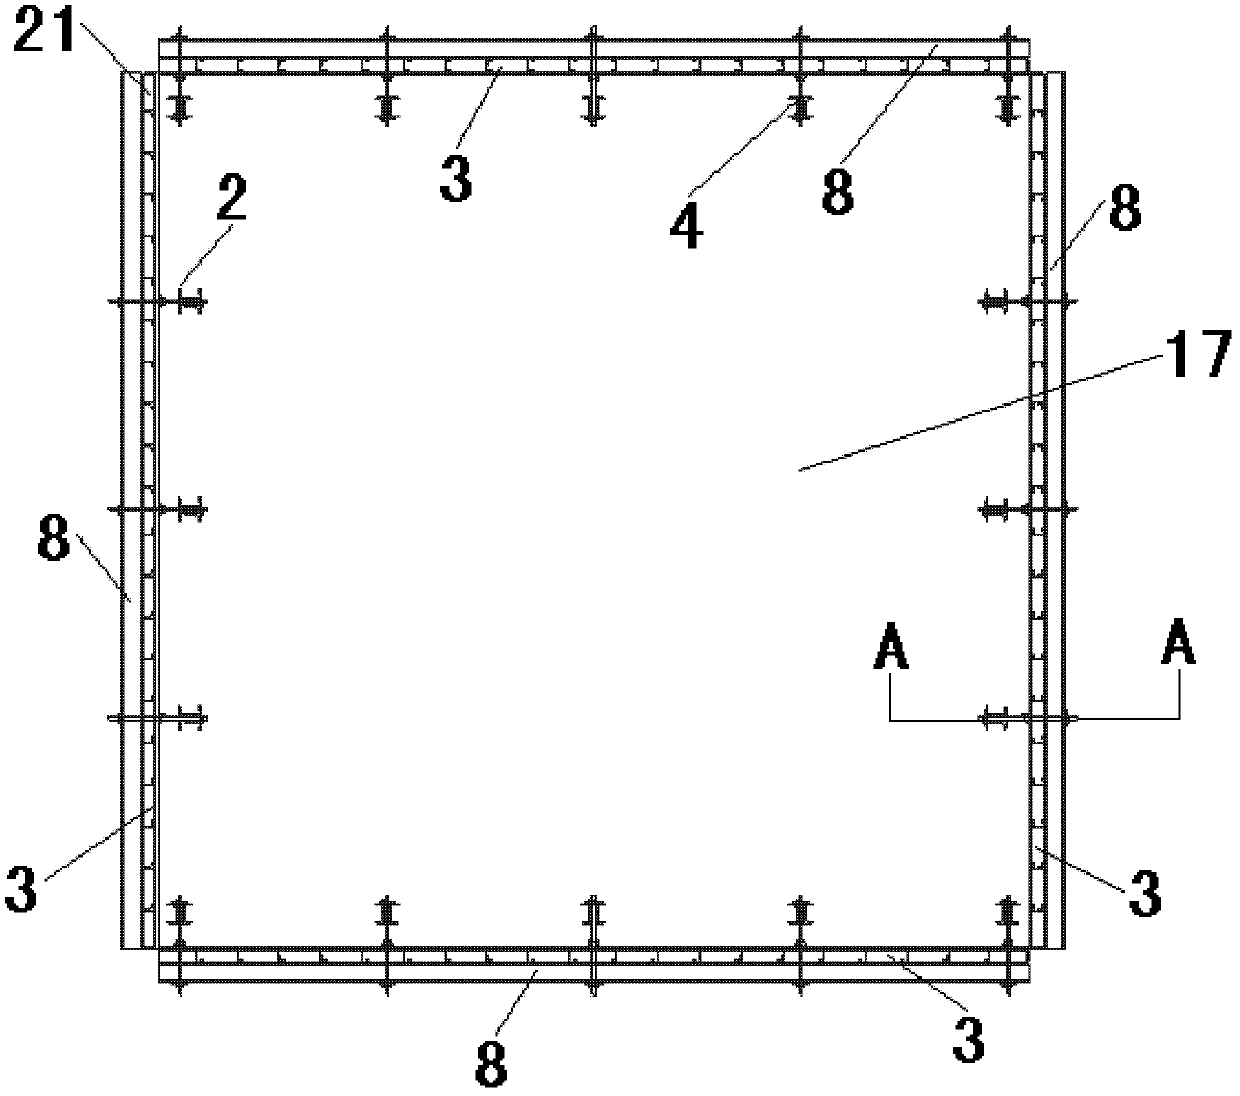 Template for large-volume concrete casting